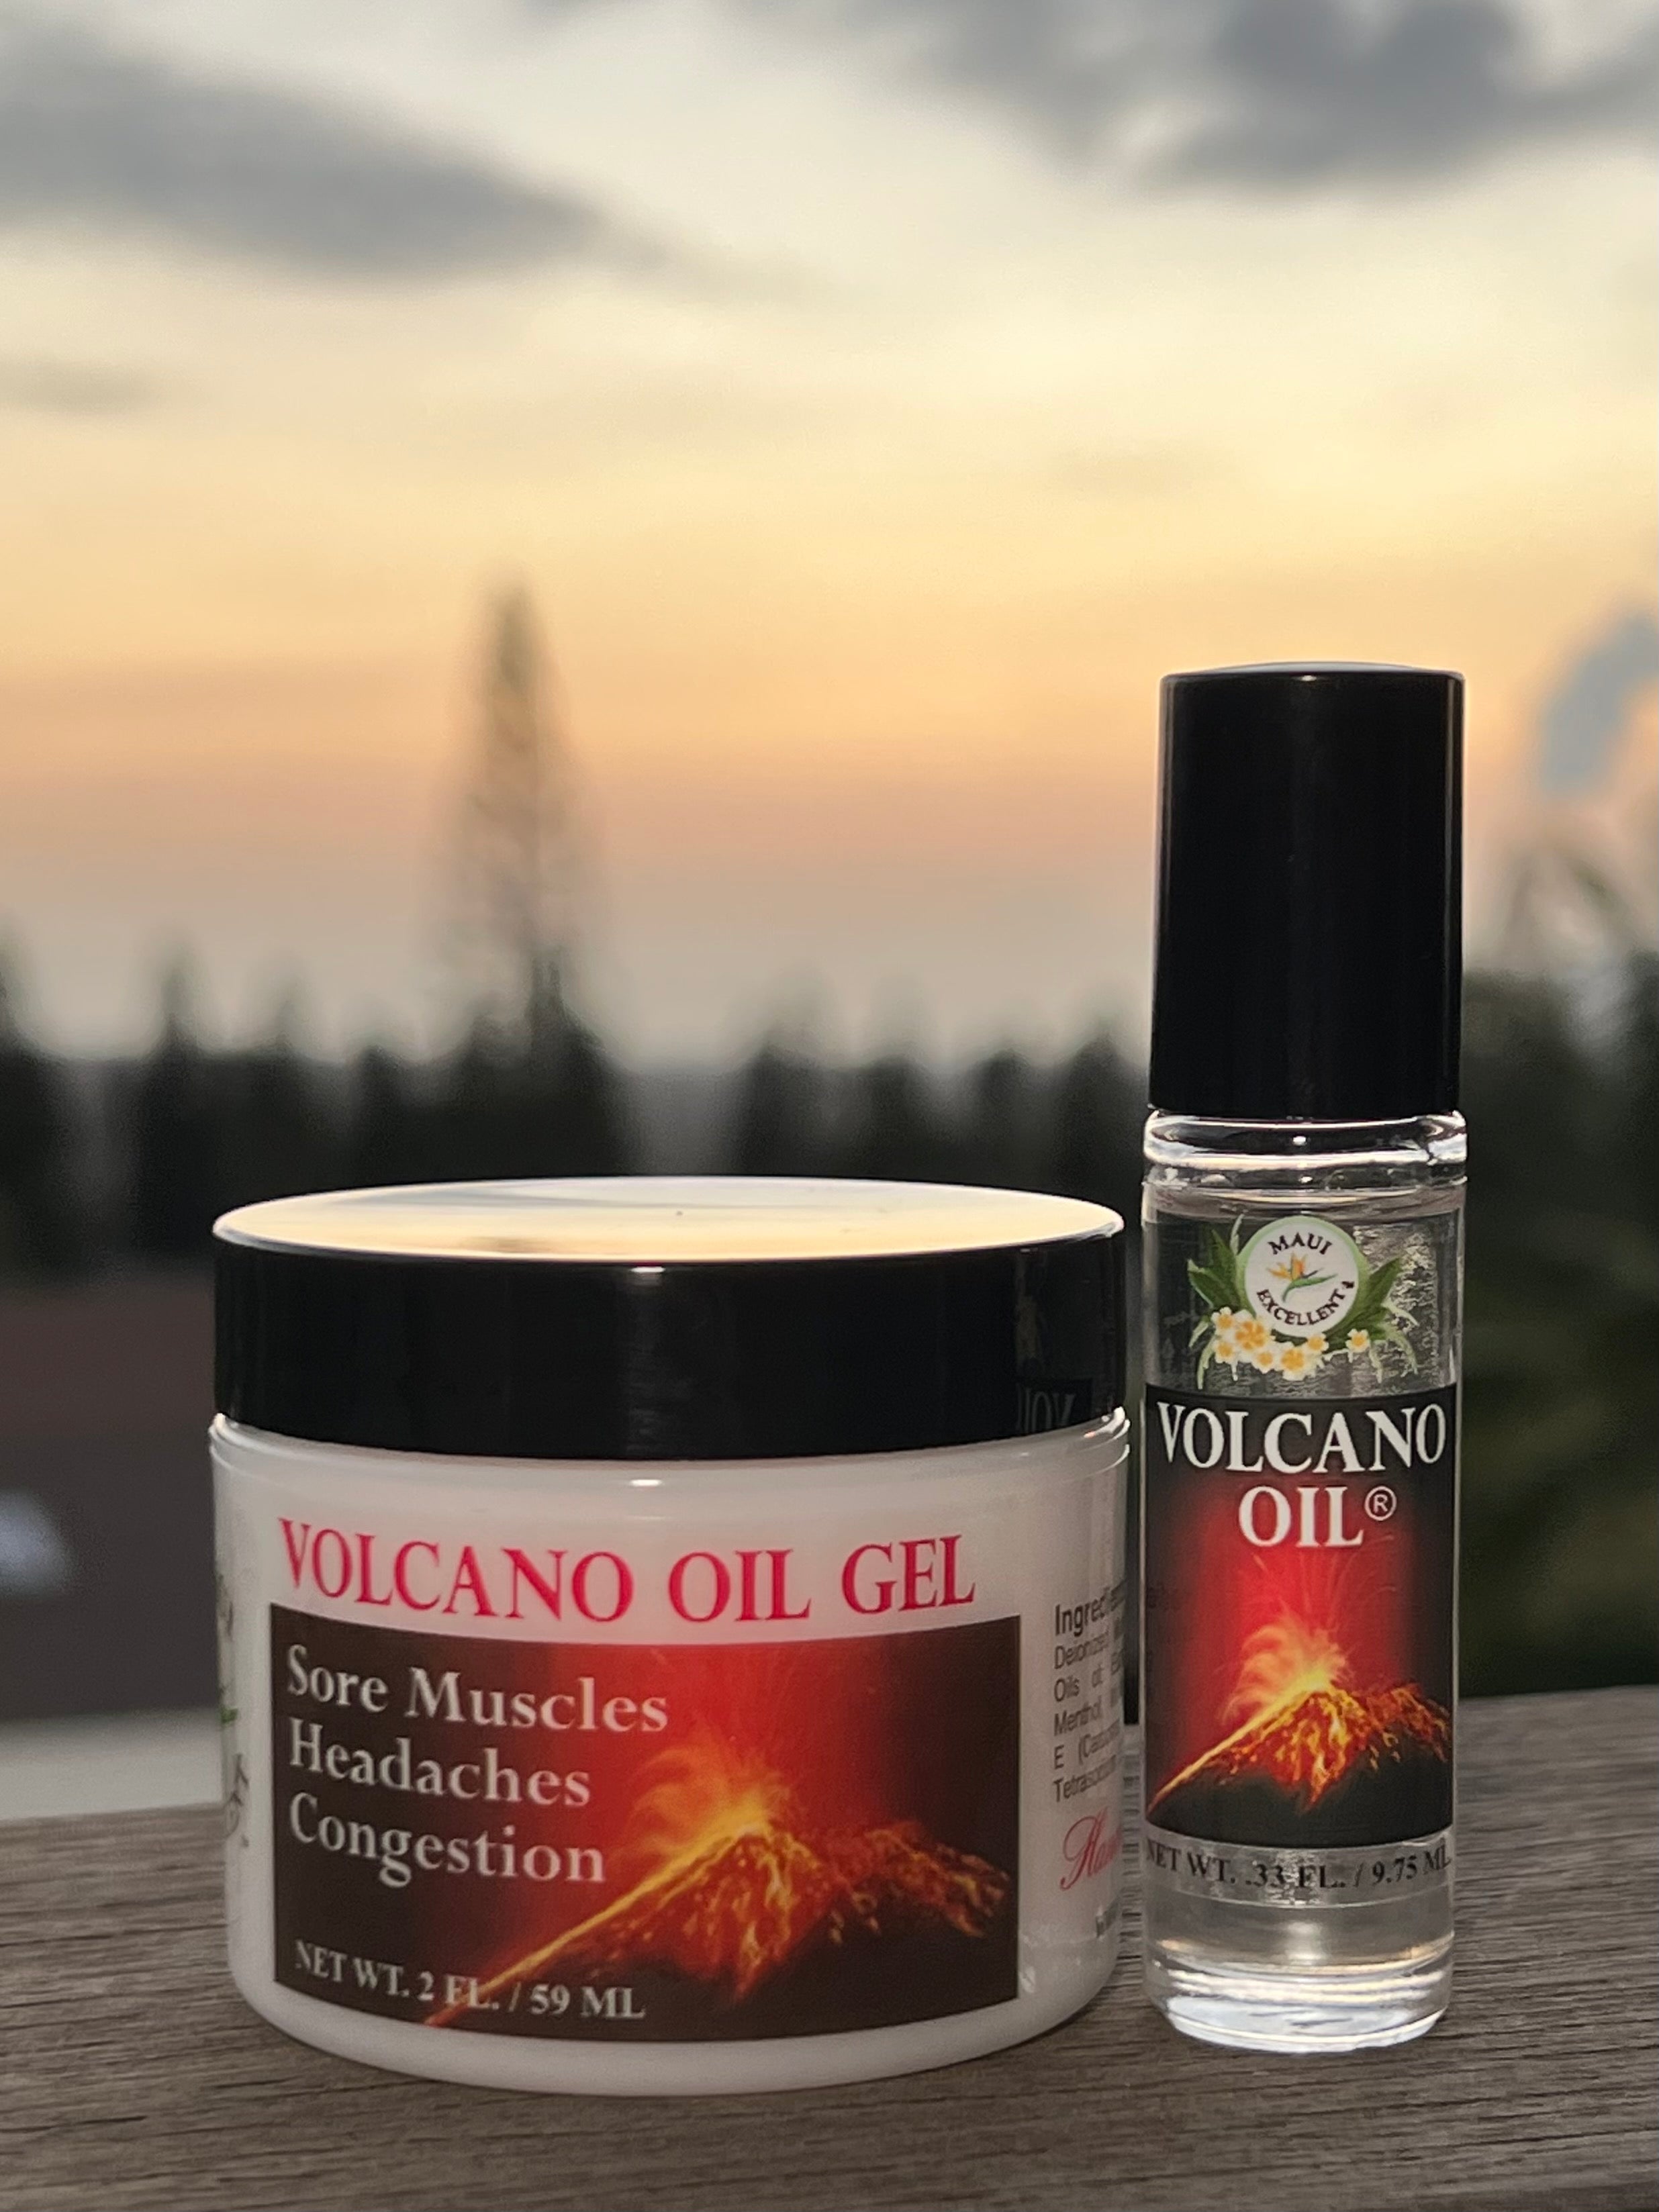 Maui Excellent Volcano Oil Gel and Volcano Oil Roll-on in foreground with sunset and tree silhouettes in the background.